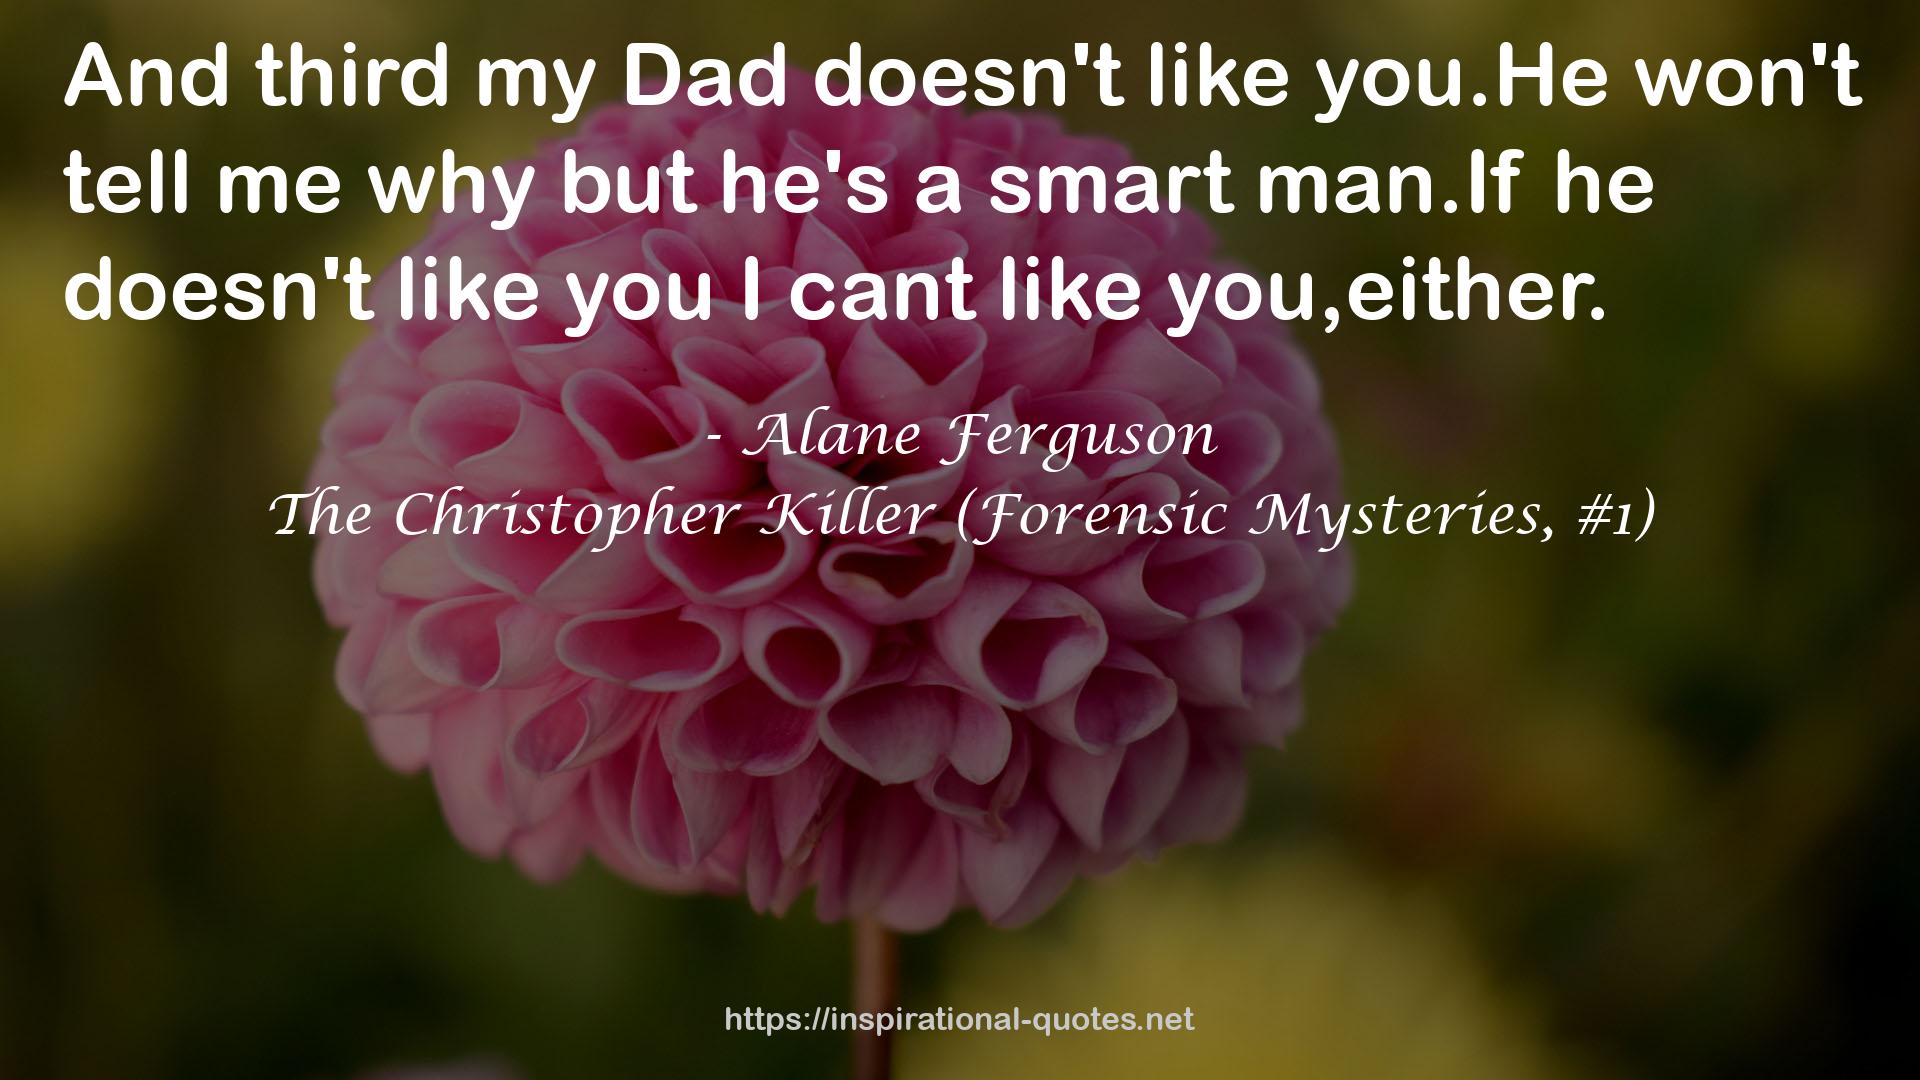 The Christopher Killer (Forensic Mysteries, #1) QUOTES